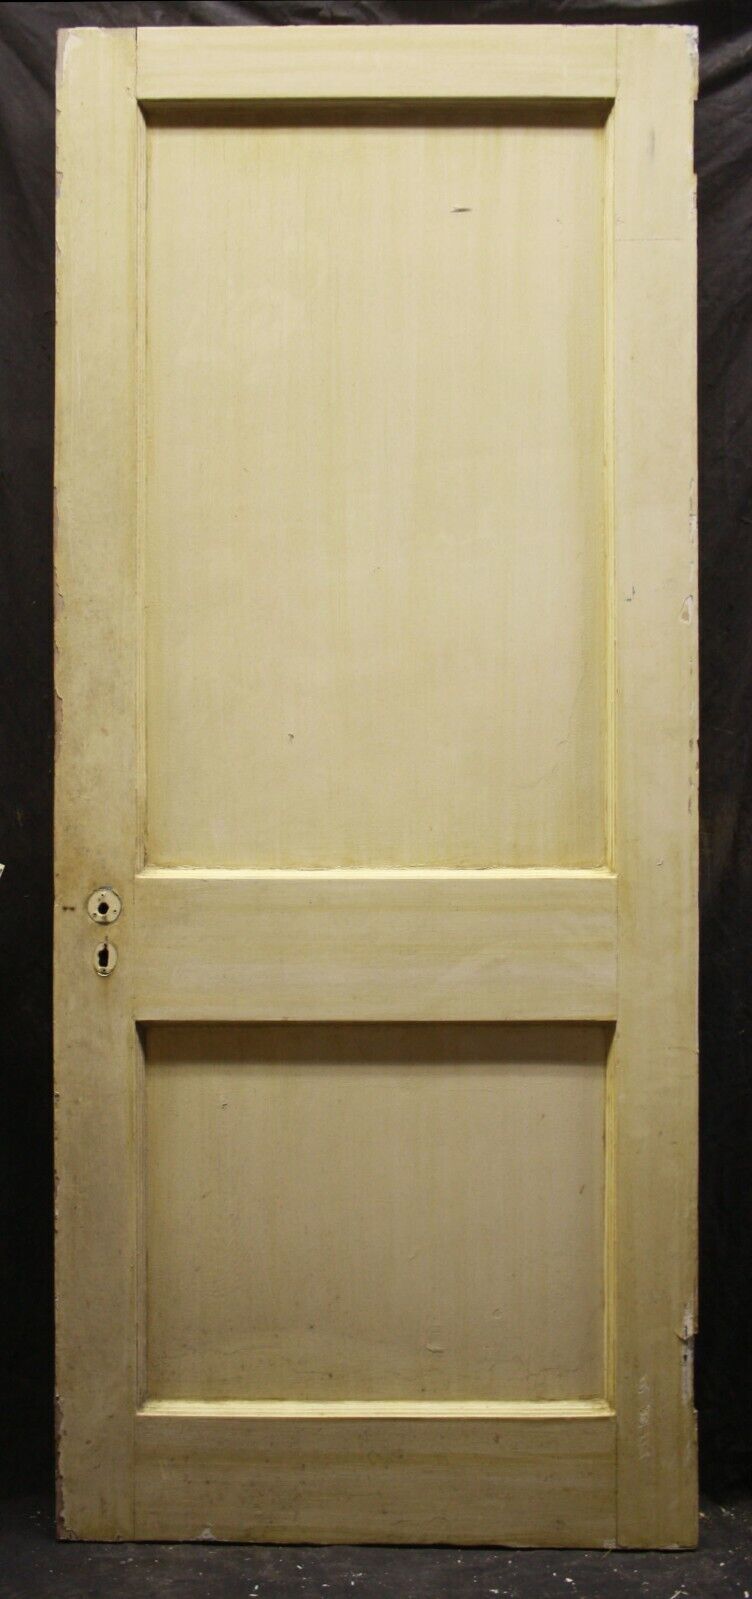 2 available 32"x78"x1.75" Antique Vintage Old Reclaimed Salvaged Solid Wood Wooden Interior Door 2 Two Panel